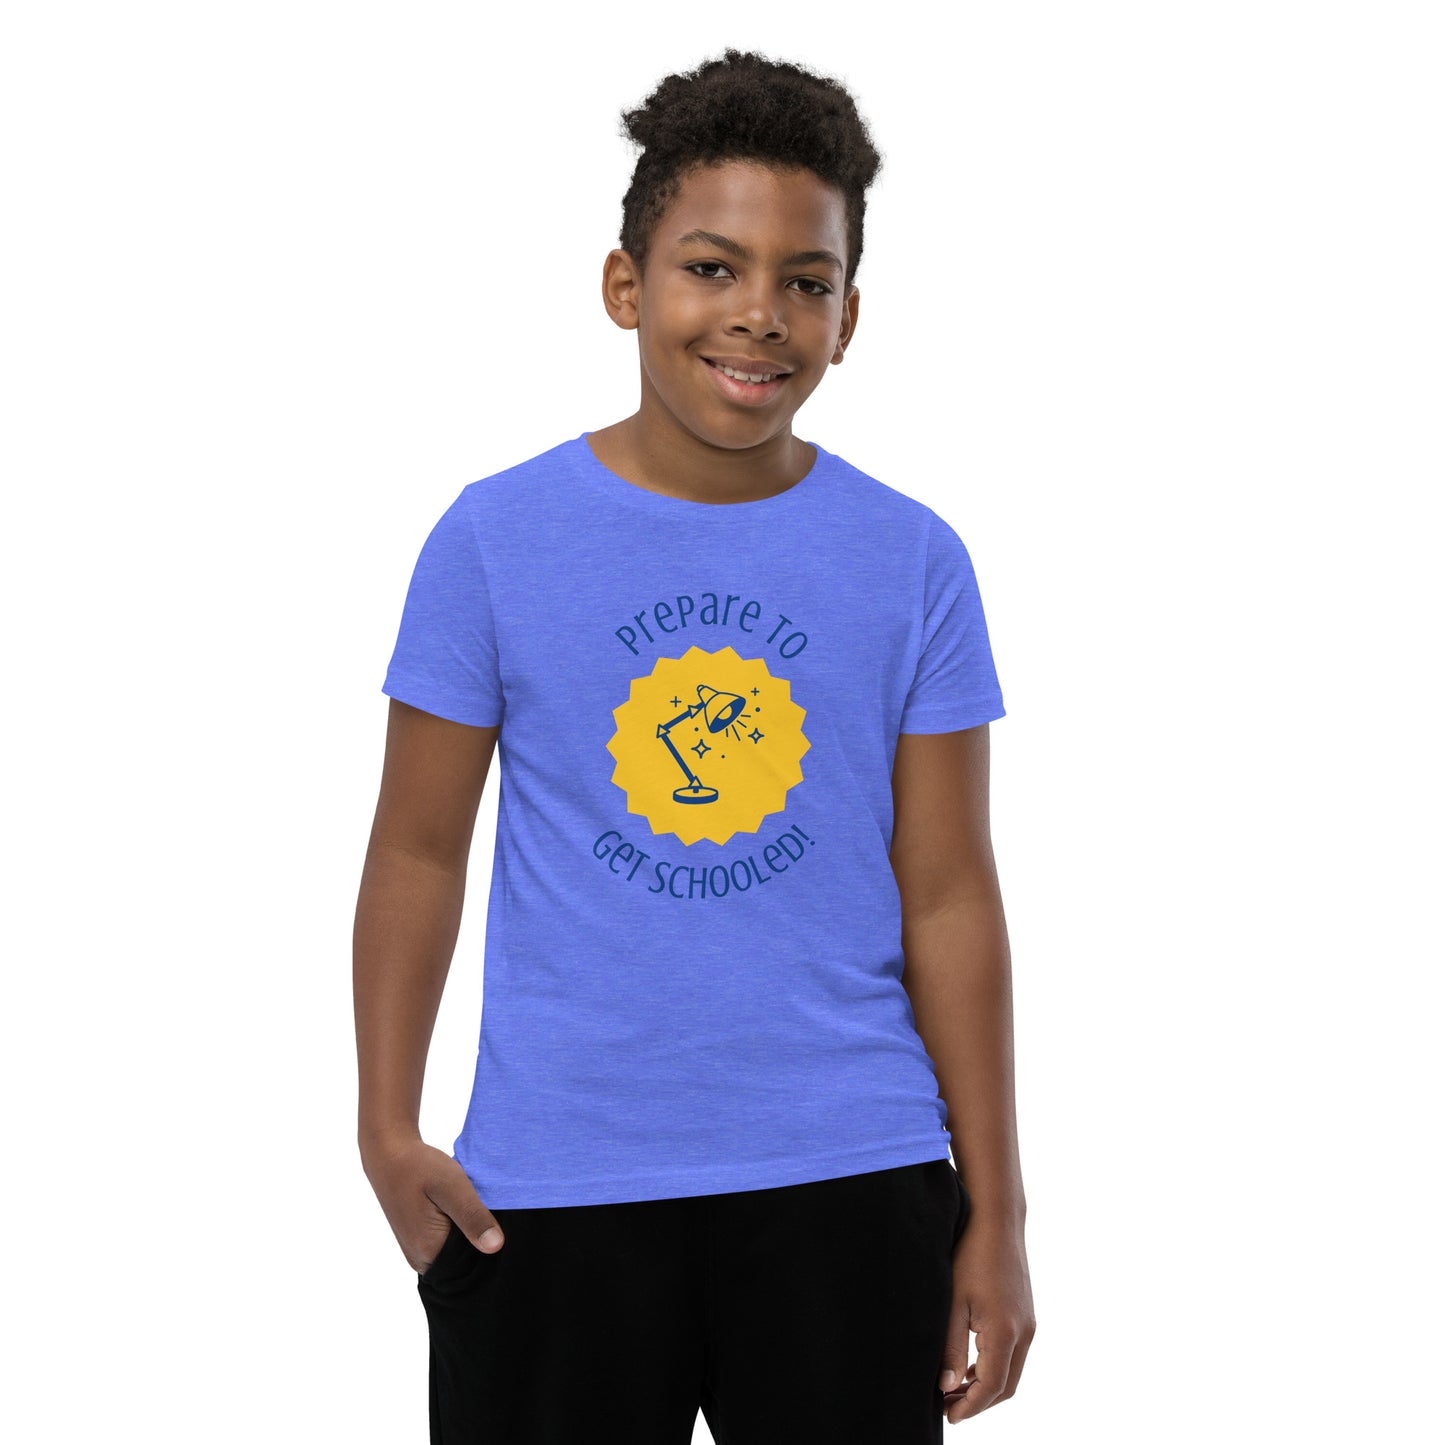 Prepare to get Schooled Youth Short Sleeve T-Shirt